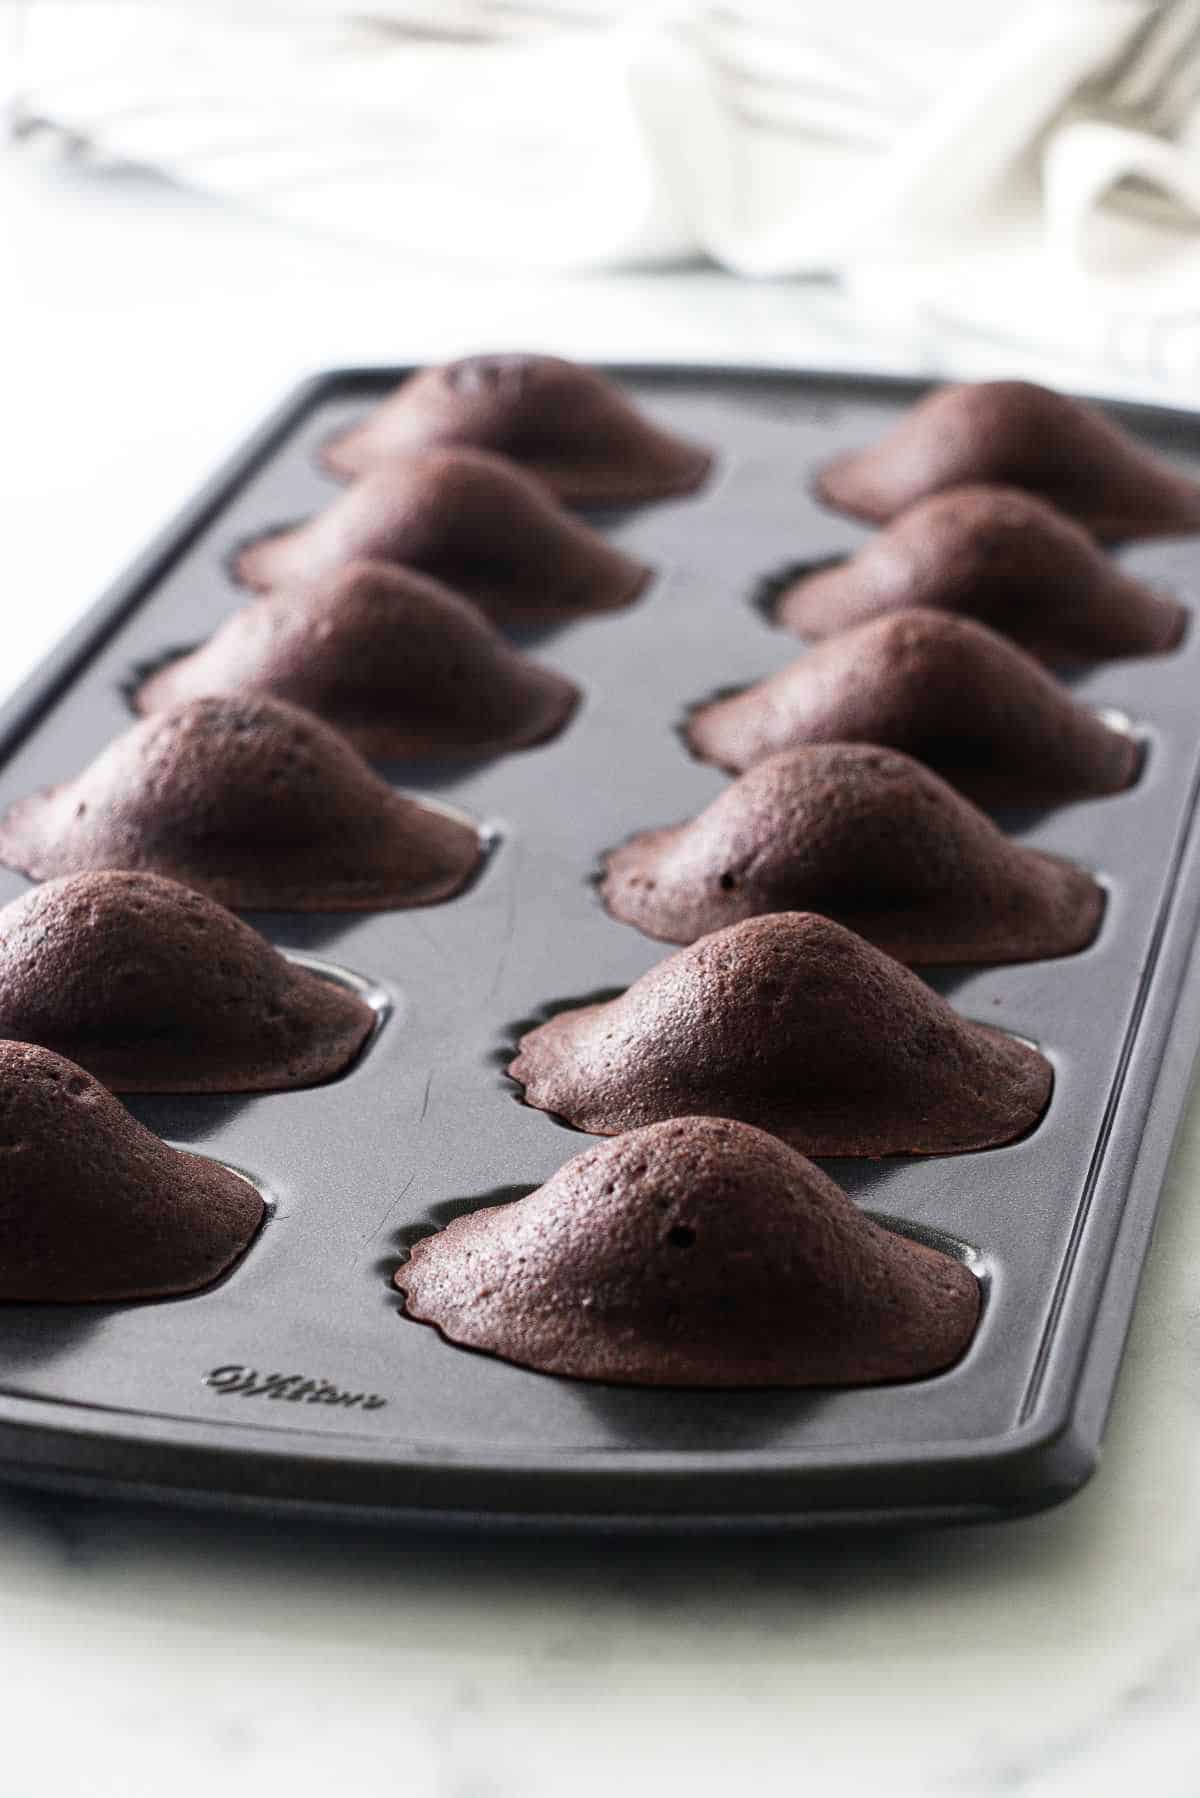 domed chocolate madeleines in a pan.